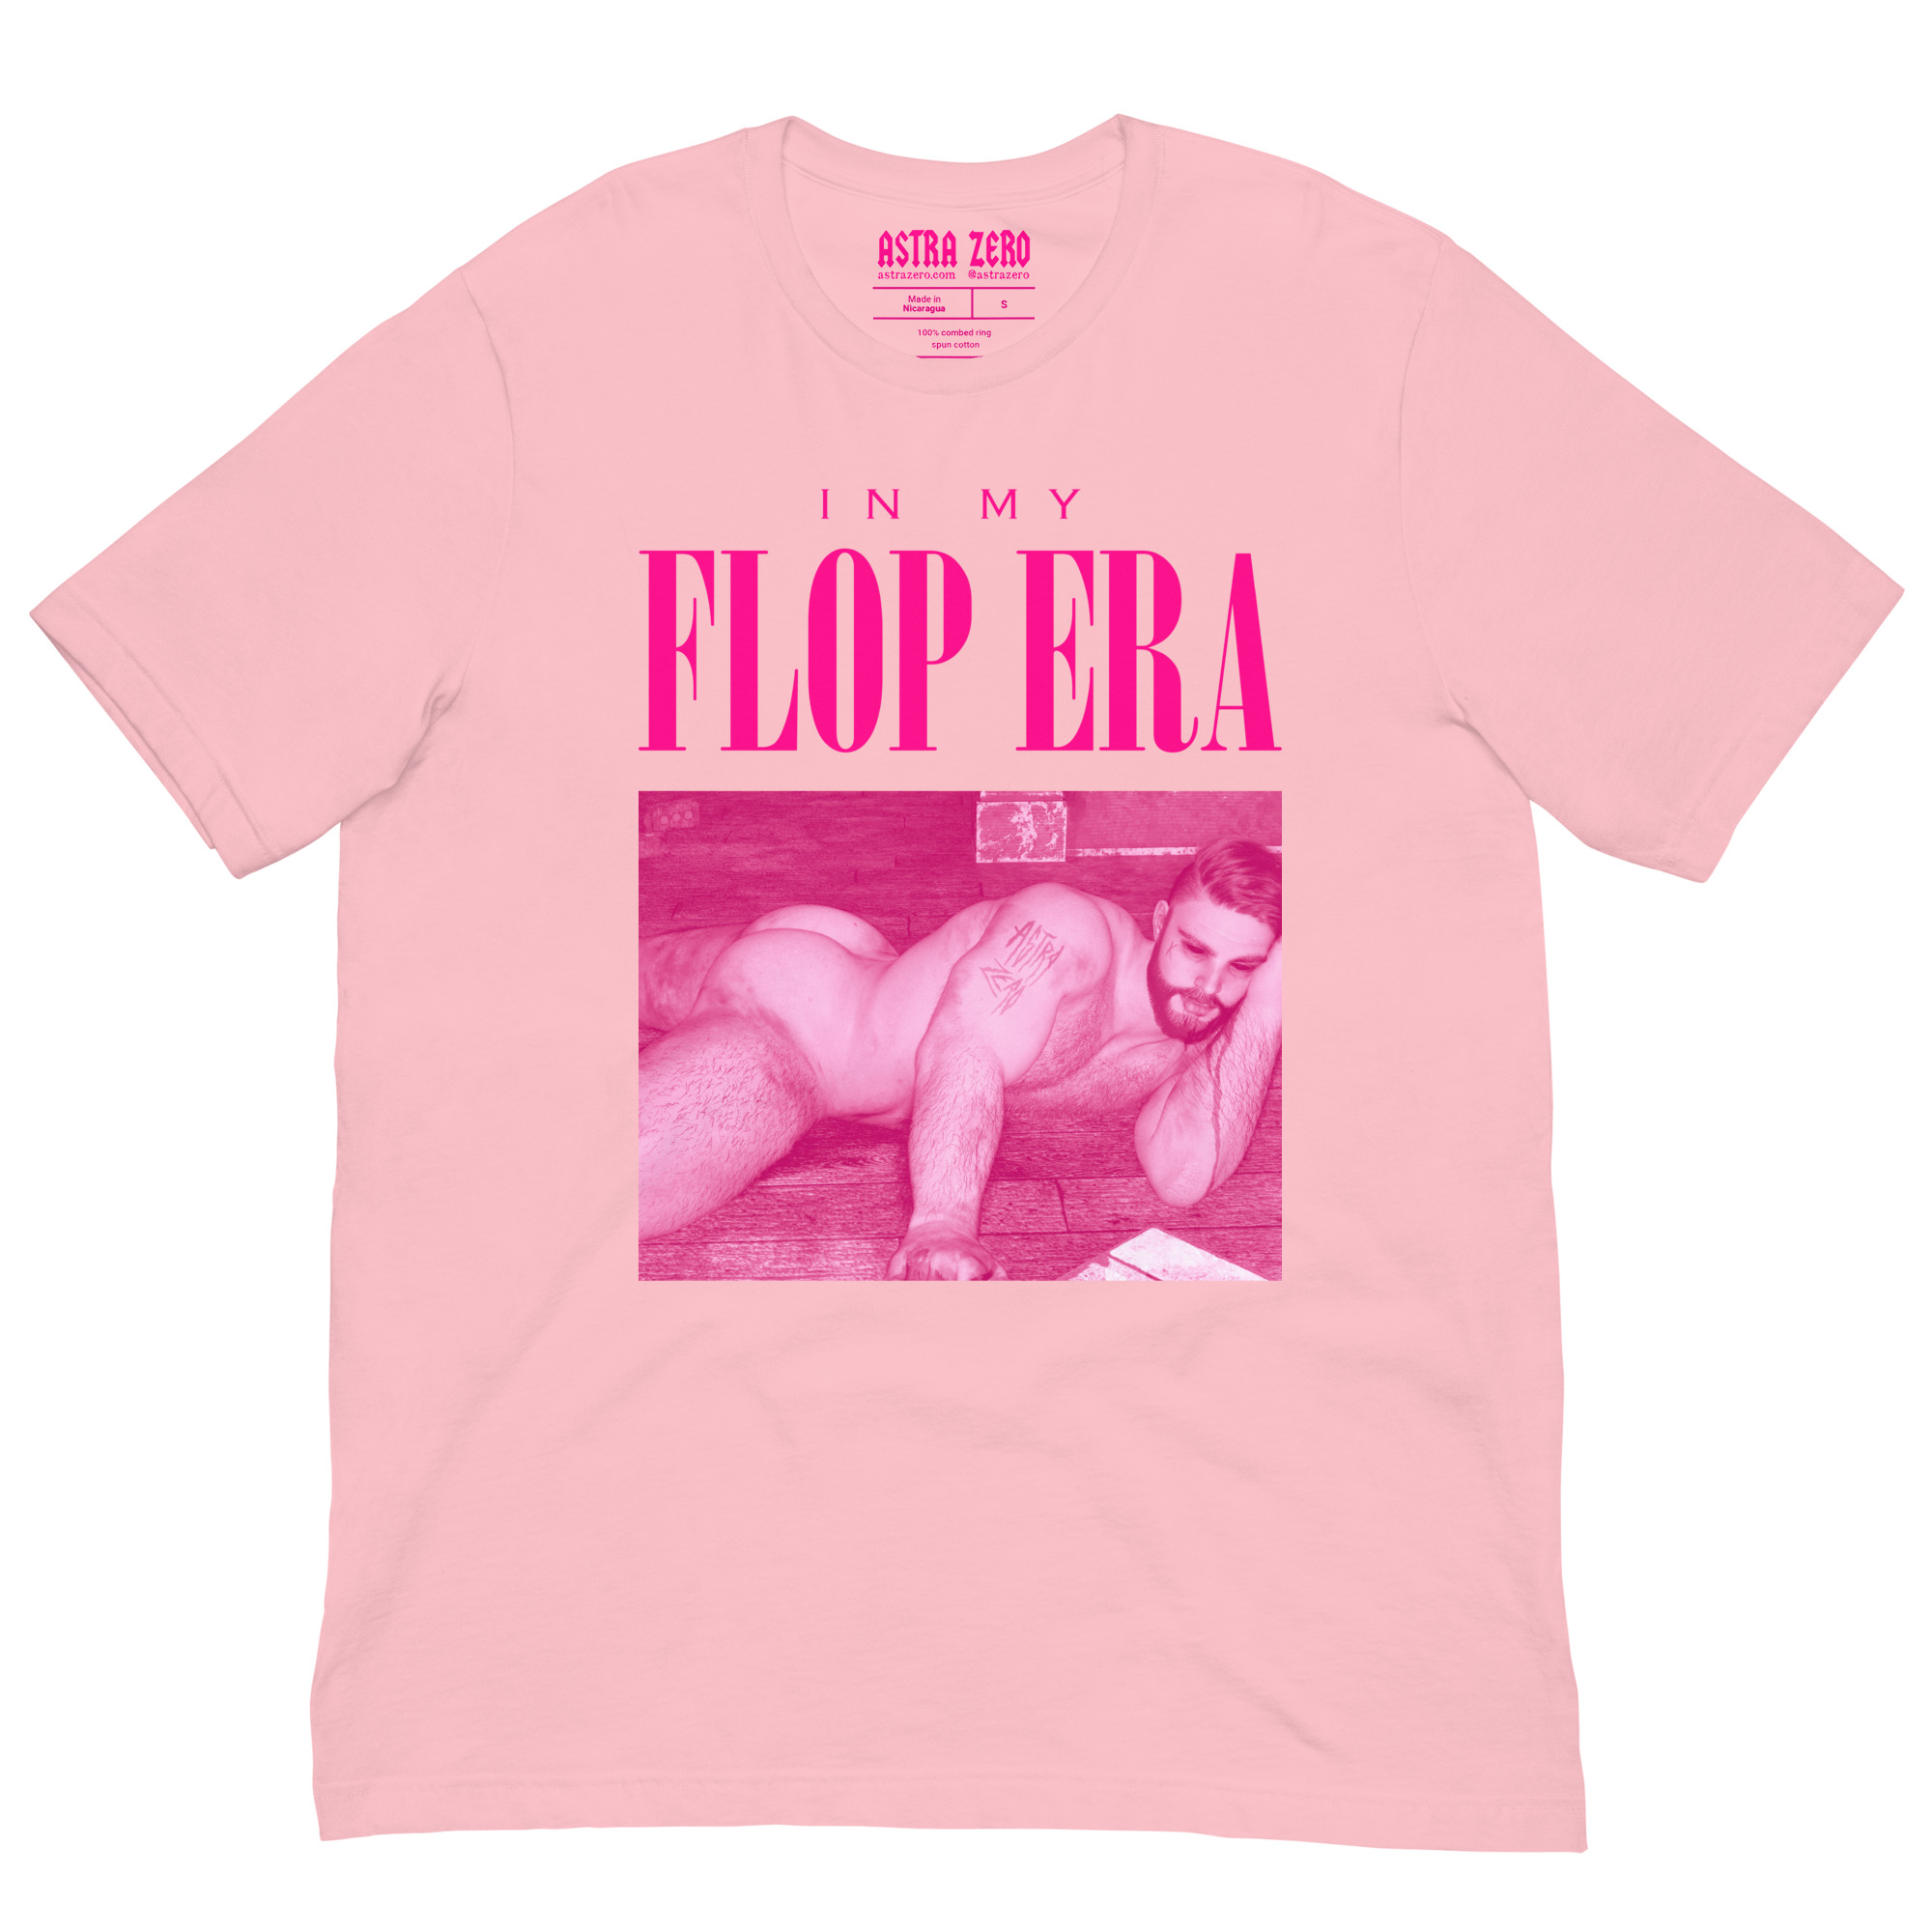 Featured image for “In my FLOP ERA - Unisex t-shirt”